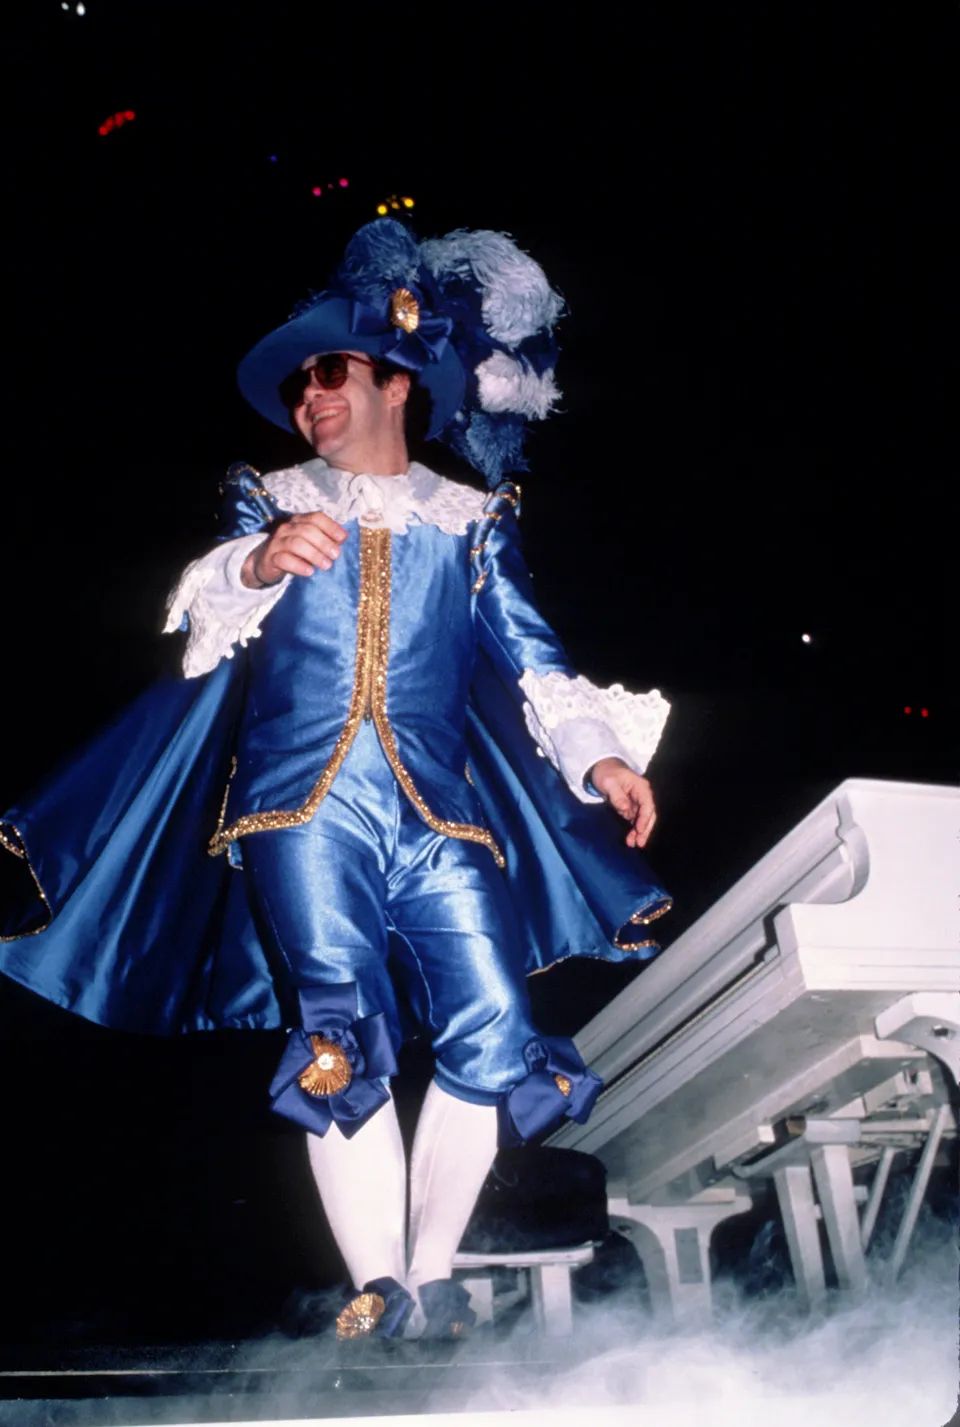 Elton John performing in rainbow array at Madison Square Garden in New York in August 1982